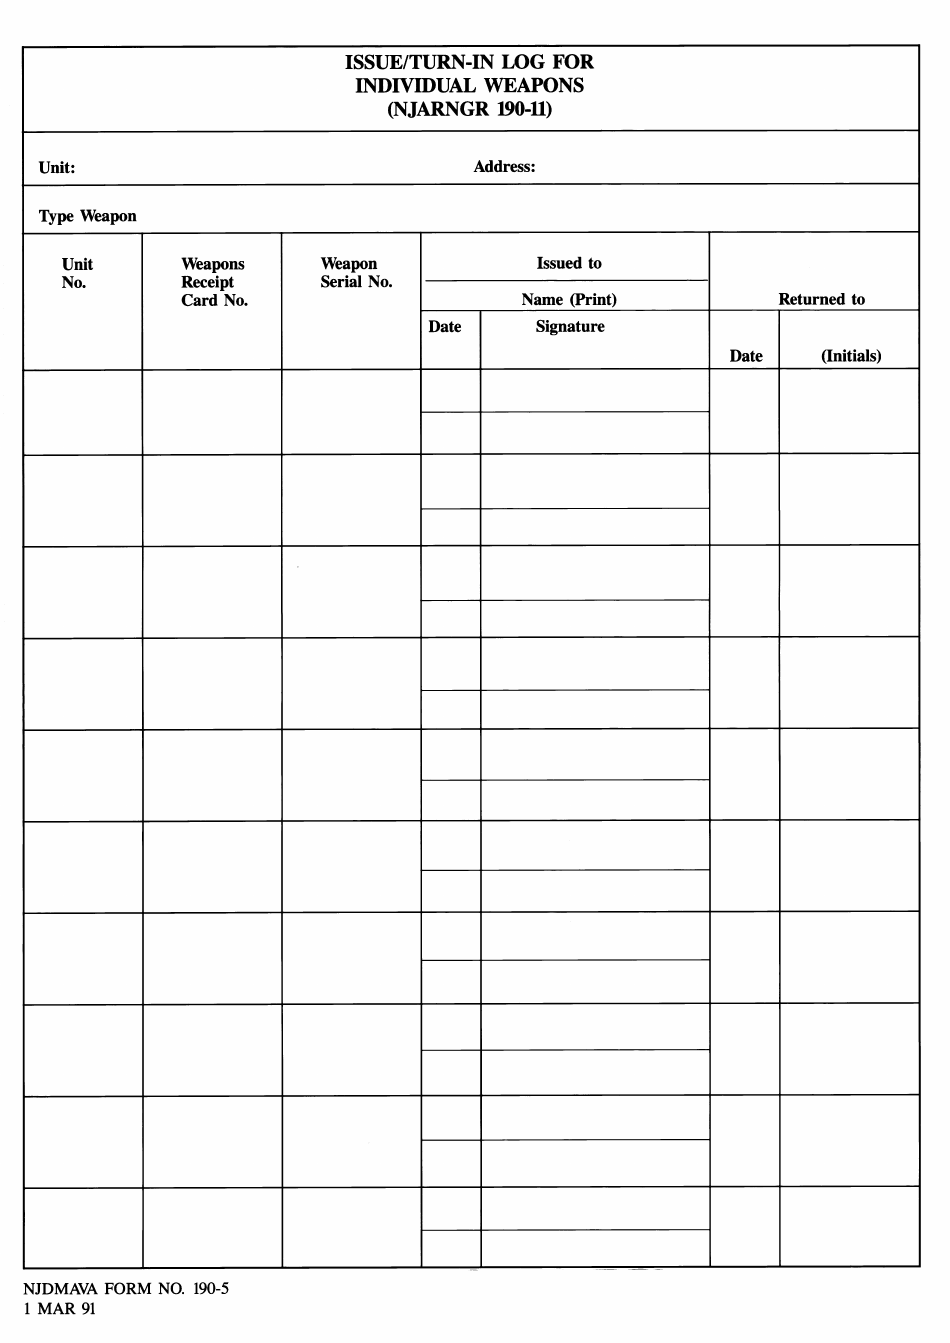 NJDMAVA Form 190-5 Issue / Turn-In Log for Individual Weapons (Njarngr 190-11) - New Jersey, Page 1